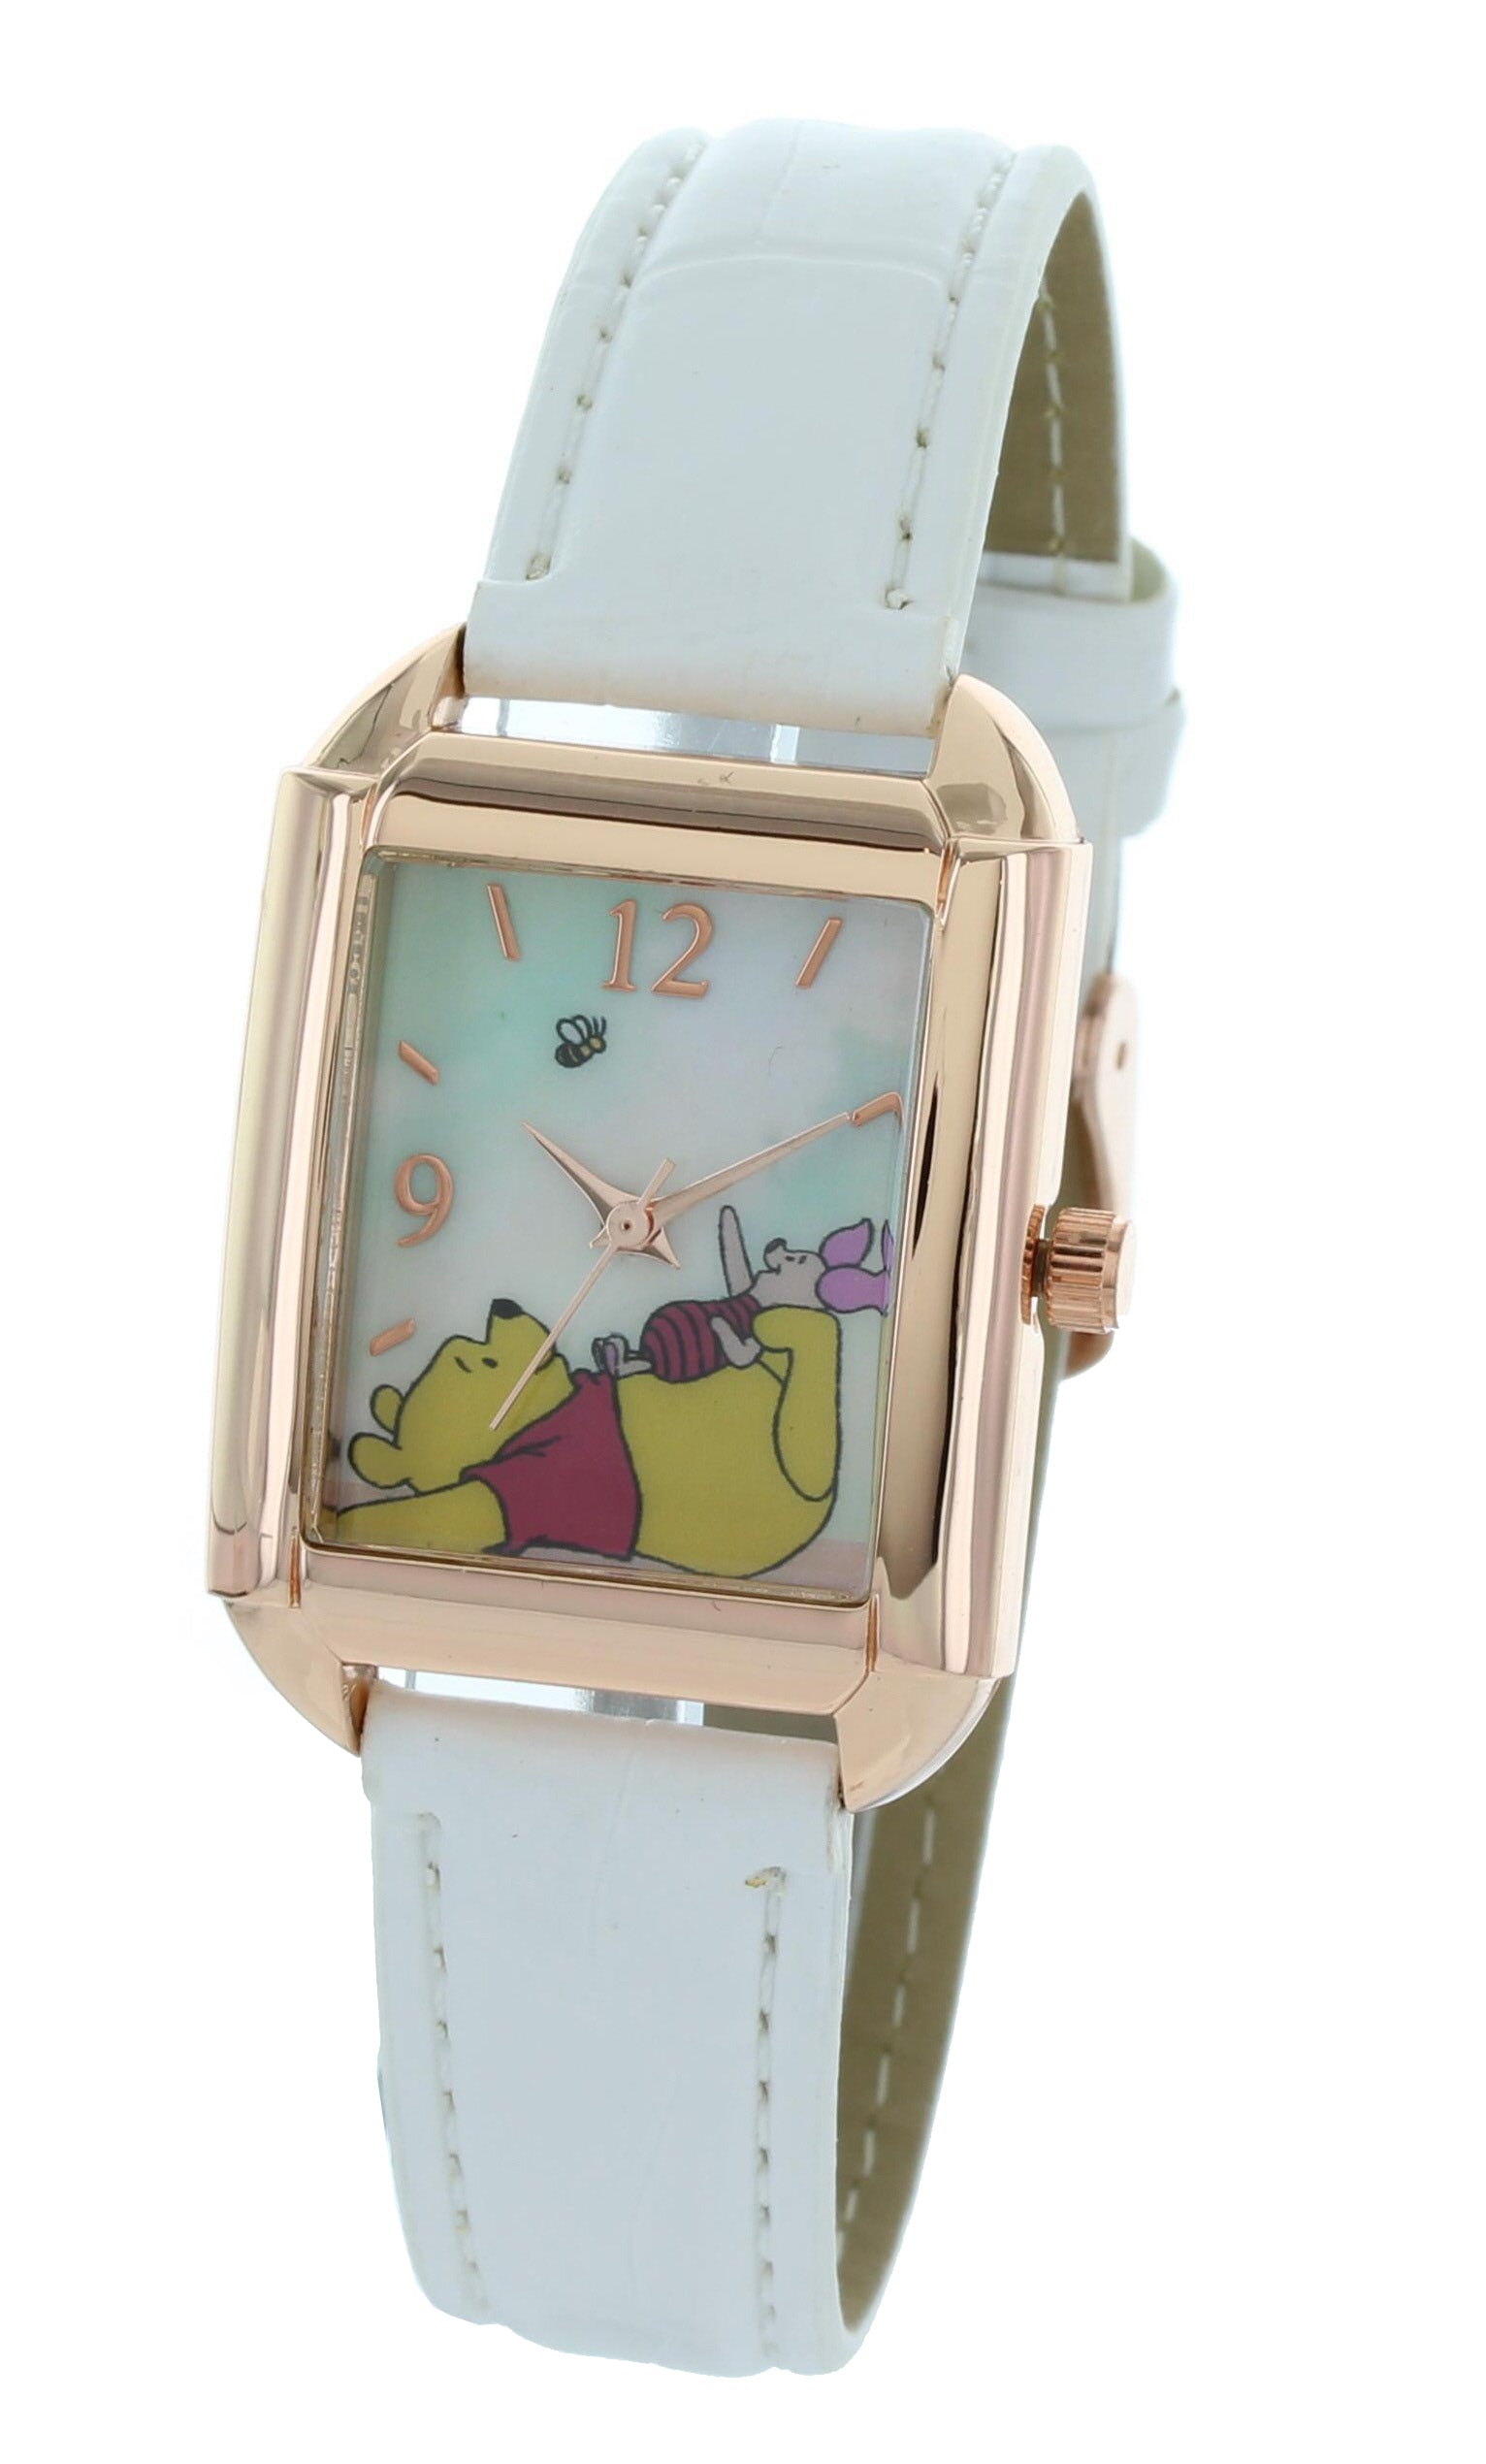 Model: Women’s Disney Watch Features Winnie Pooh and Piglet Watching a Bee, in Rose Gold Tone 